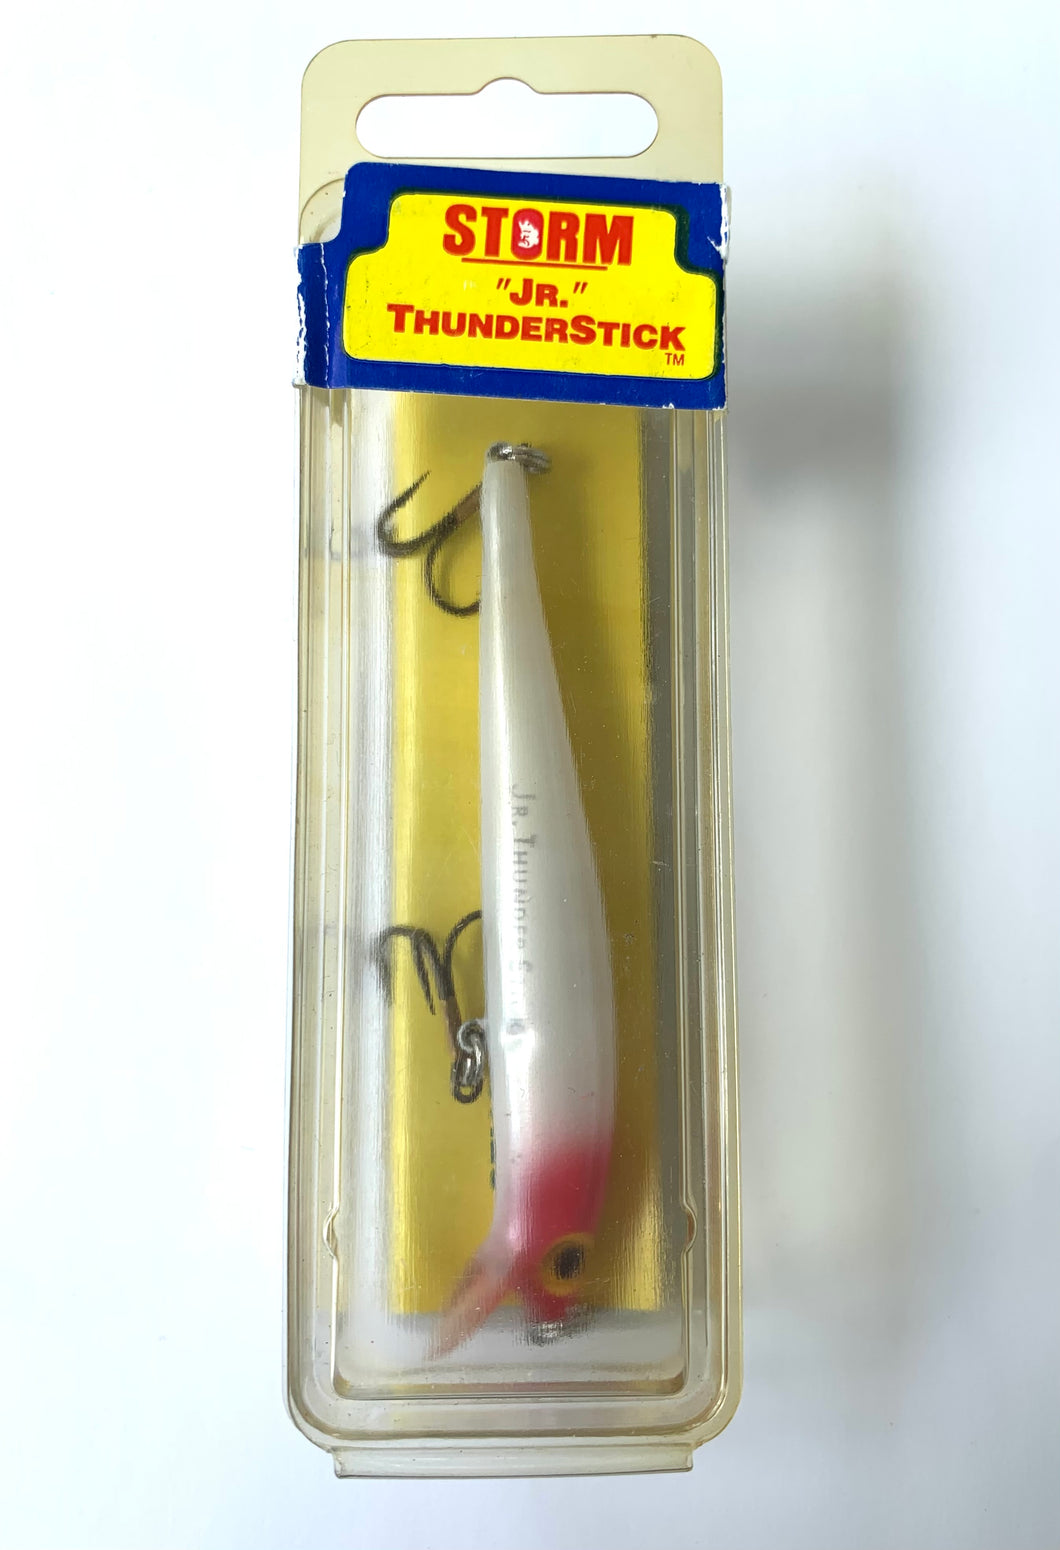 Toad Tackle • ToadTackle.net • ToadTackle.co • ToadTackle.us •  SPECIAL PRODUCTION • STORM Jr Thunderstick SP Fishing Lure • PEARL/RED HEAD